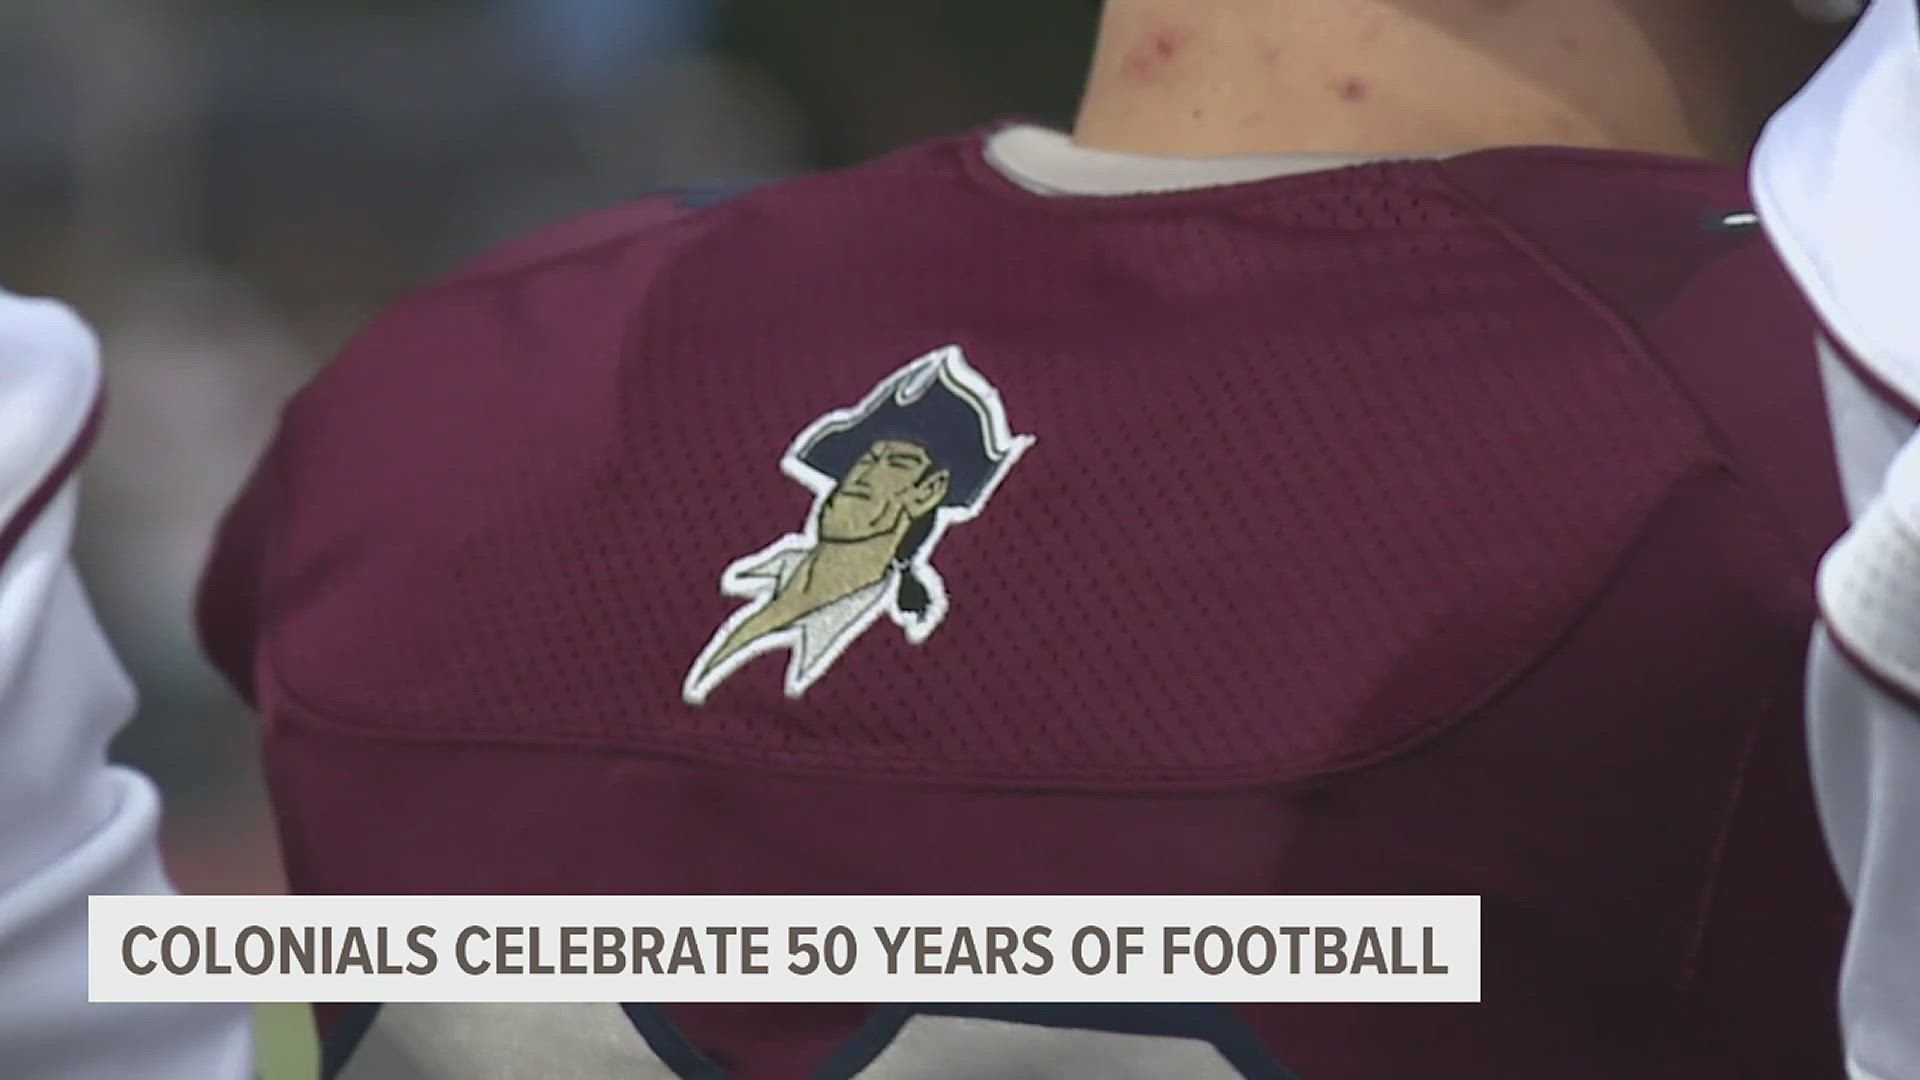 The Colonials had a celebration to honor every decade their football program has existed.